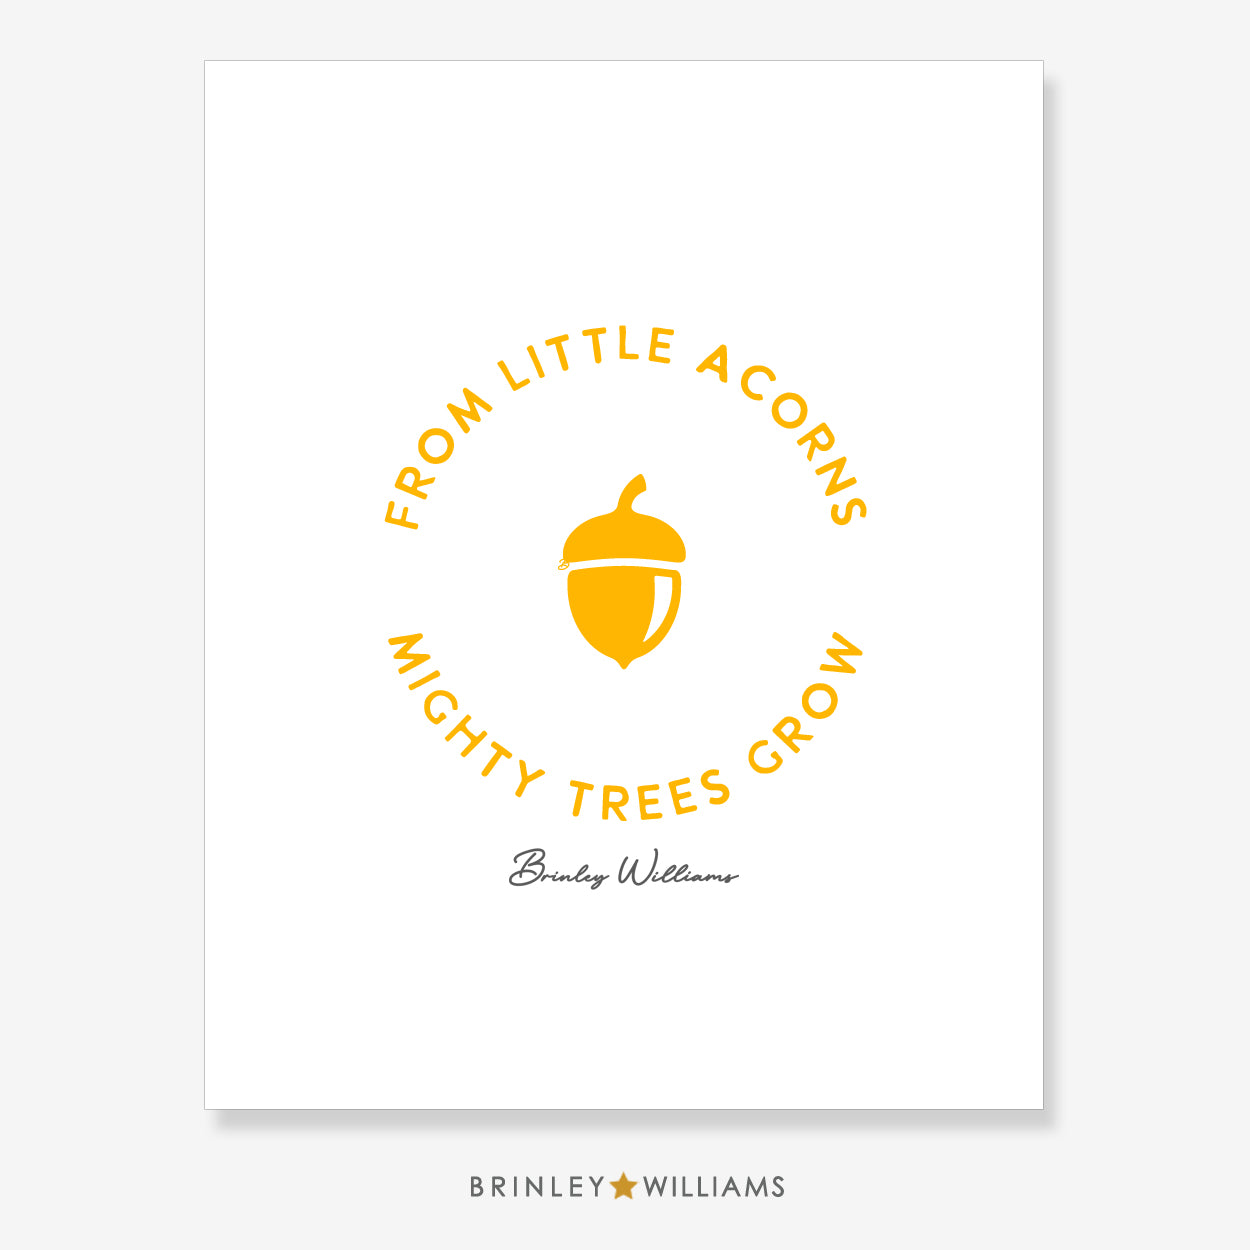 From little acorns mighty trees grow Wall Art Poster - Yellow